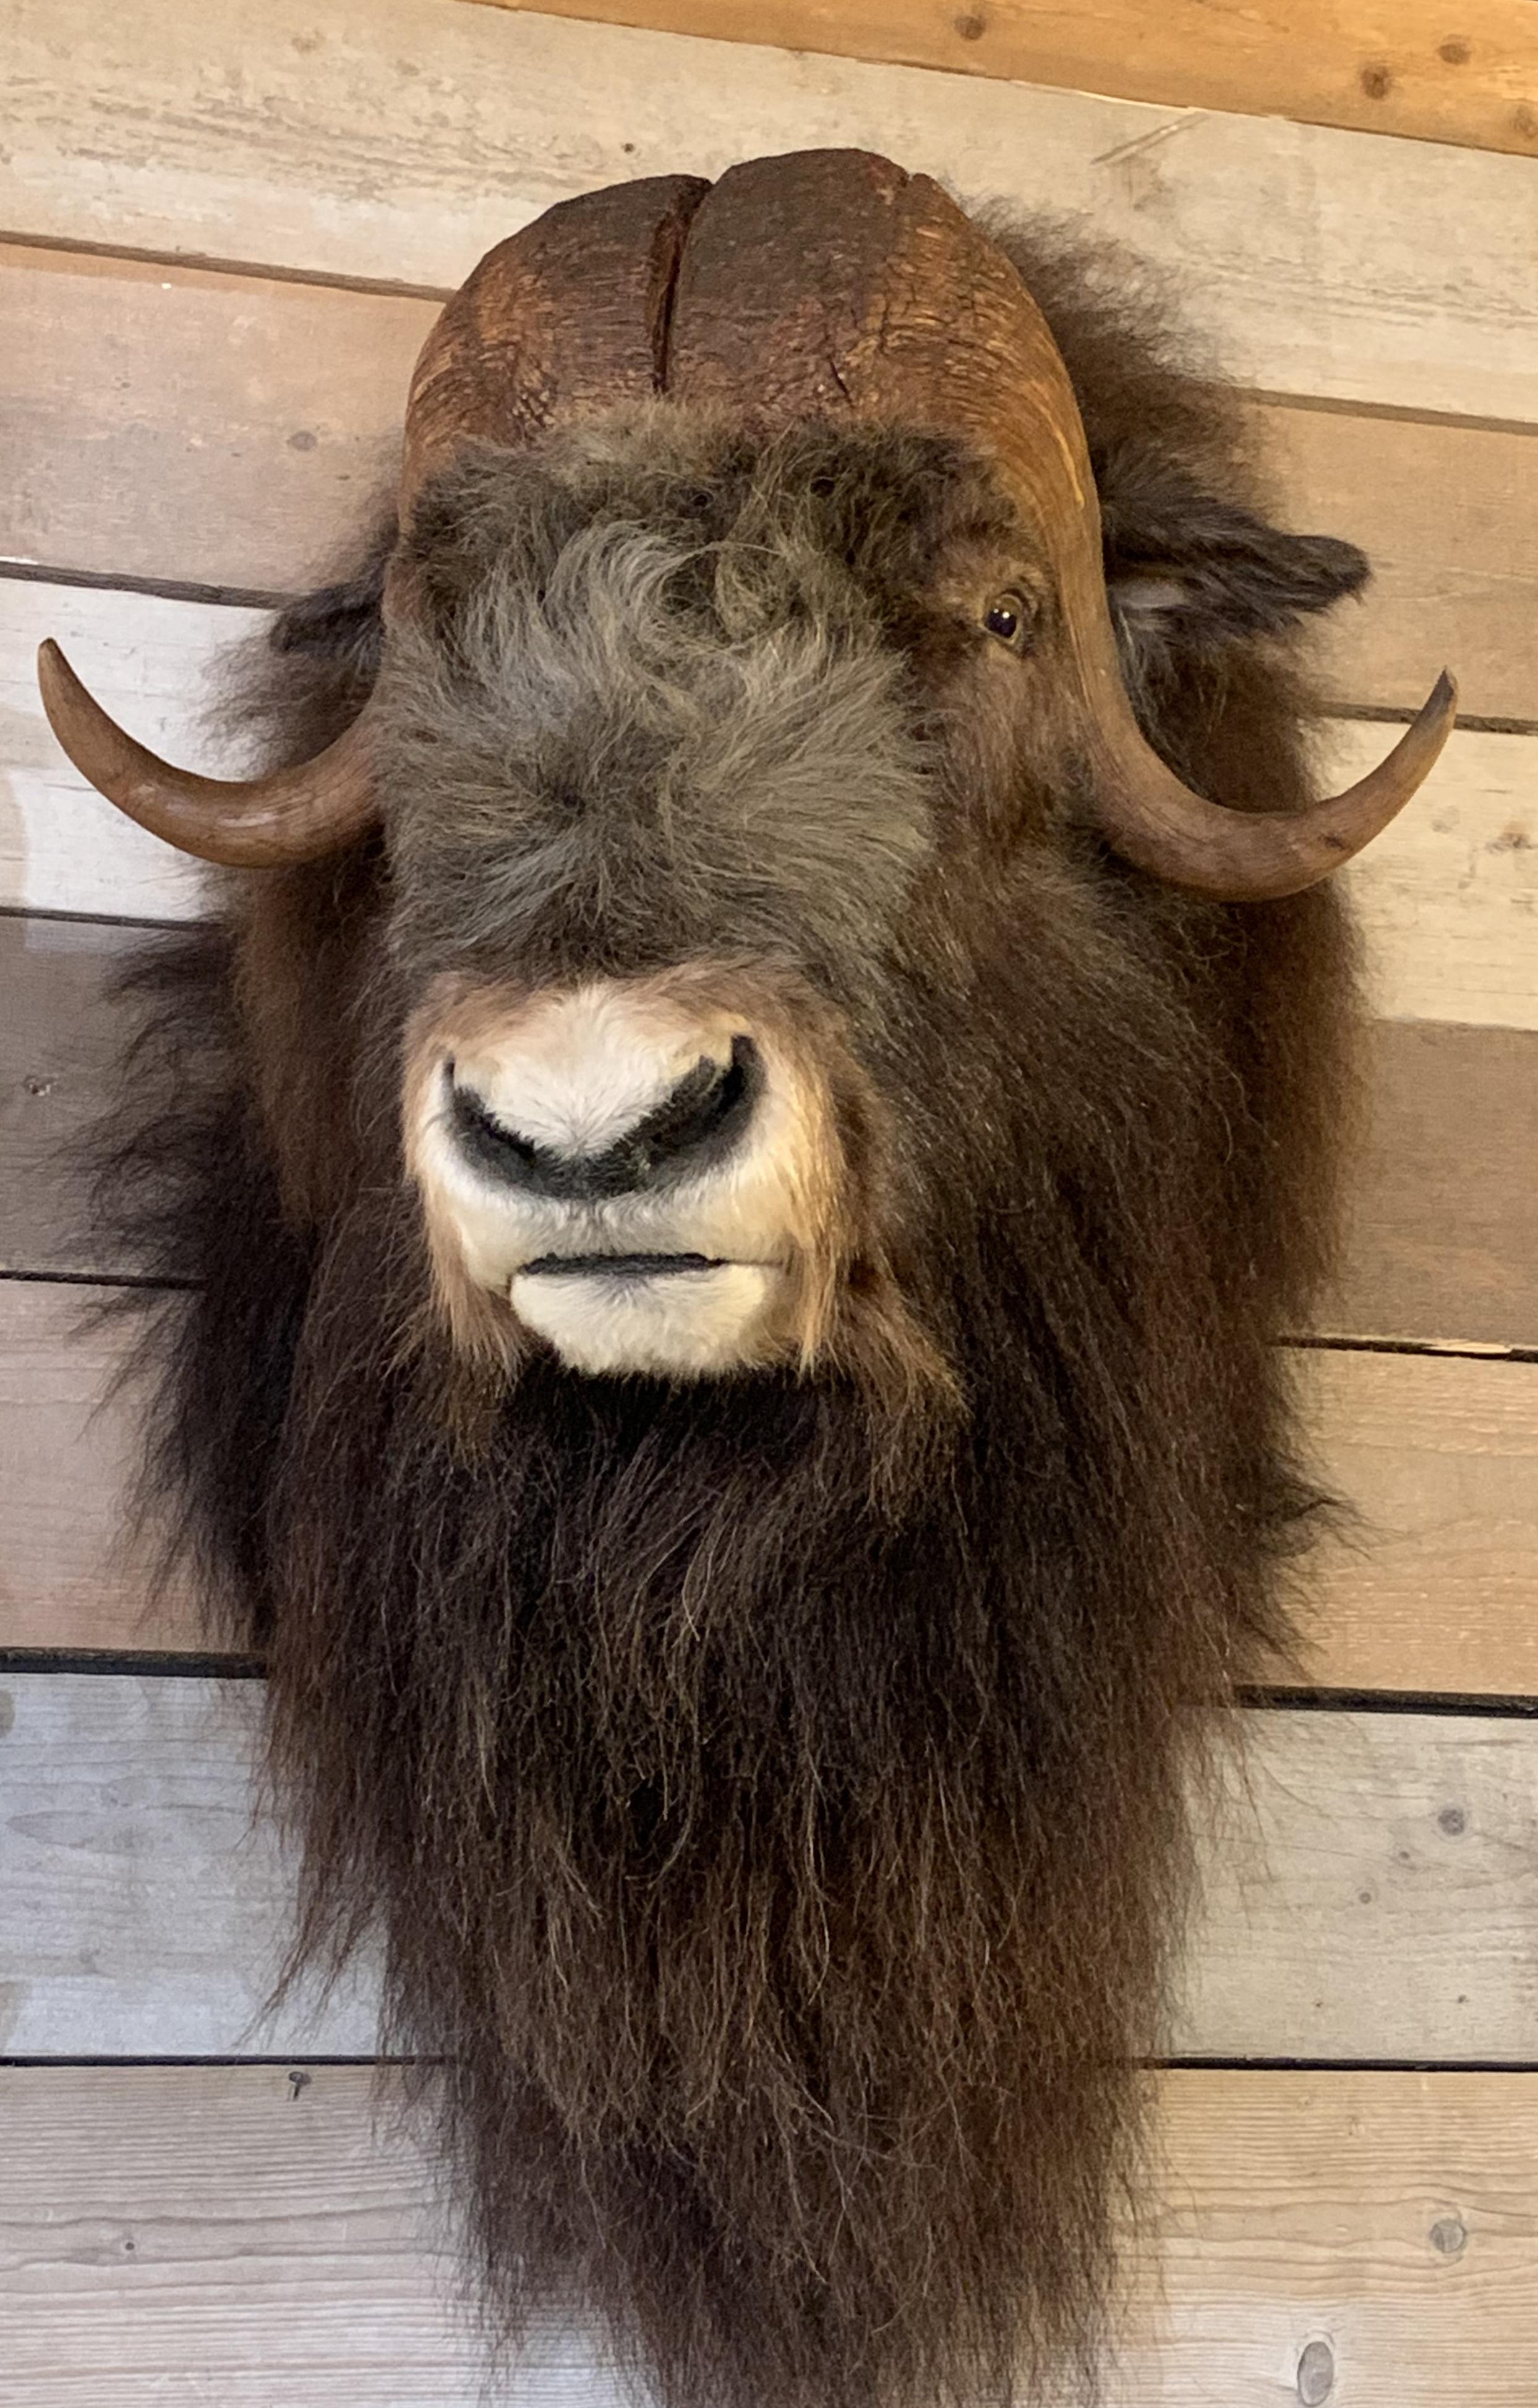 Greenlandic Exclusive Piece of Taxidermy Musk Ox